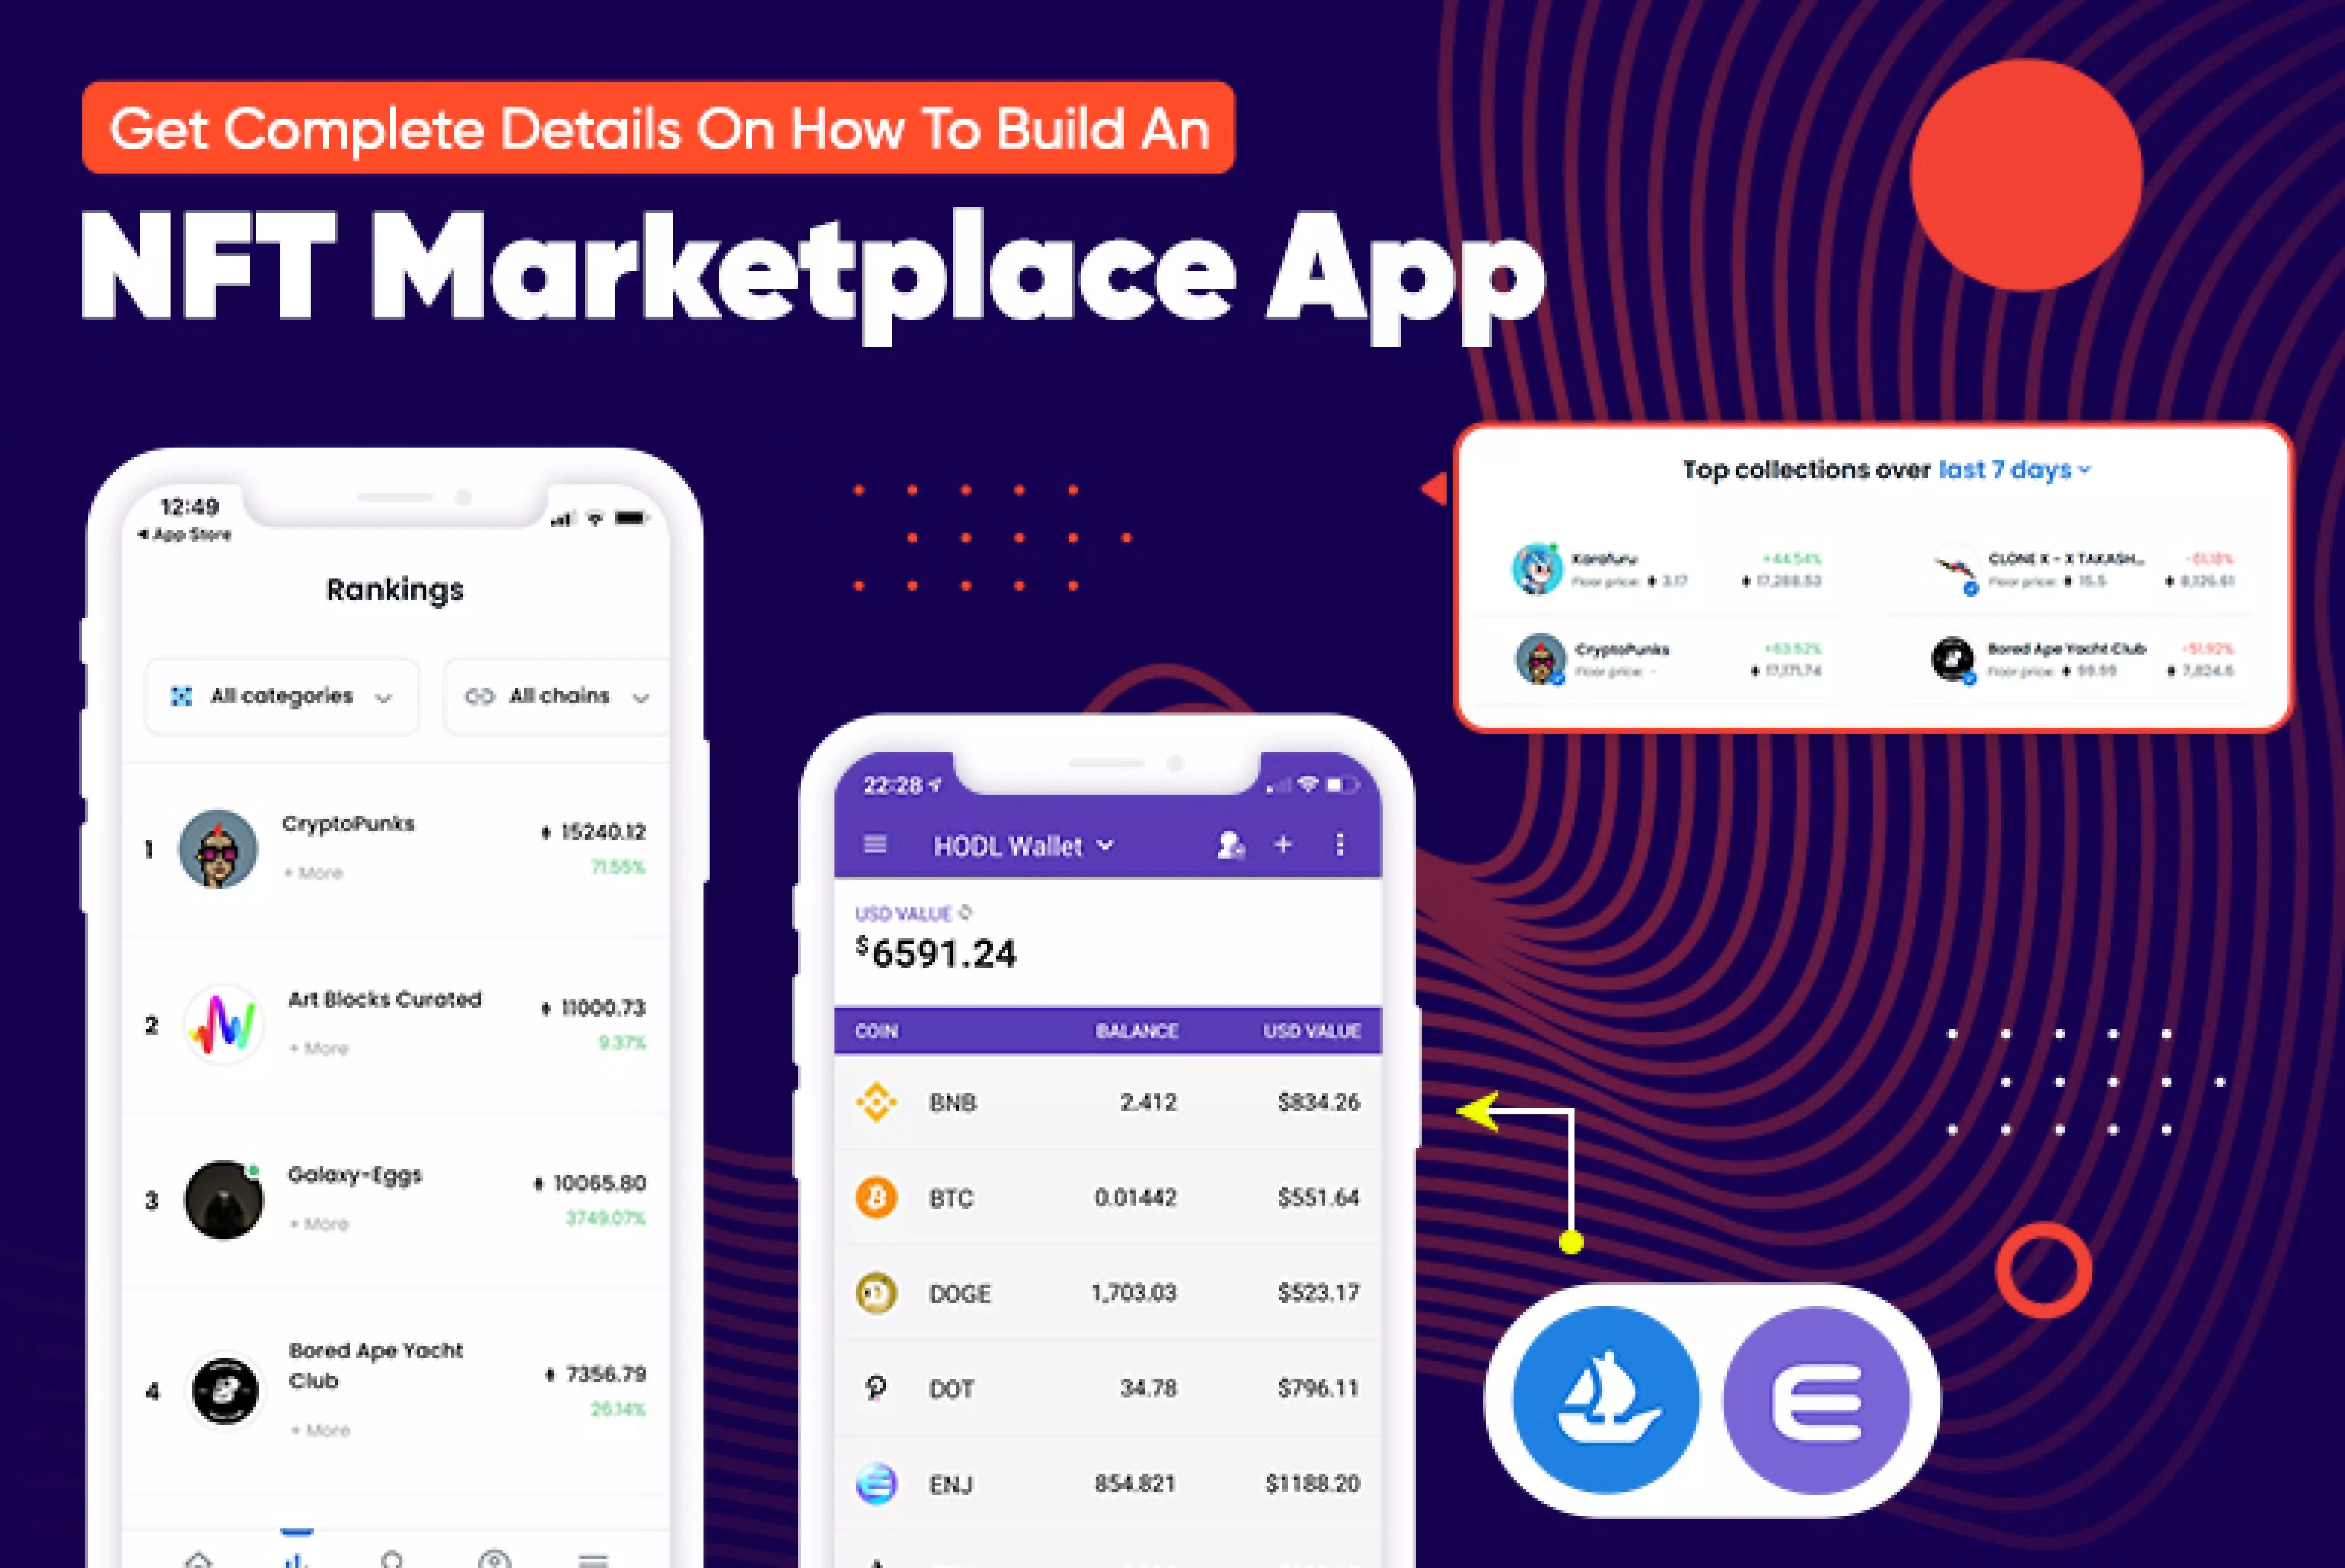 Get Complete Details On How To Build An NFT Marketplace_Thum